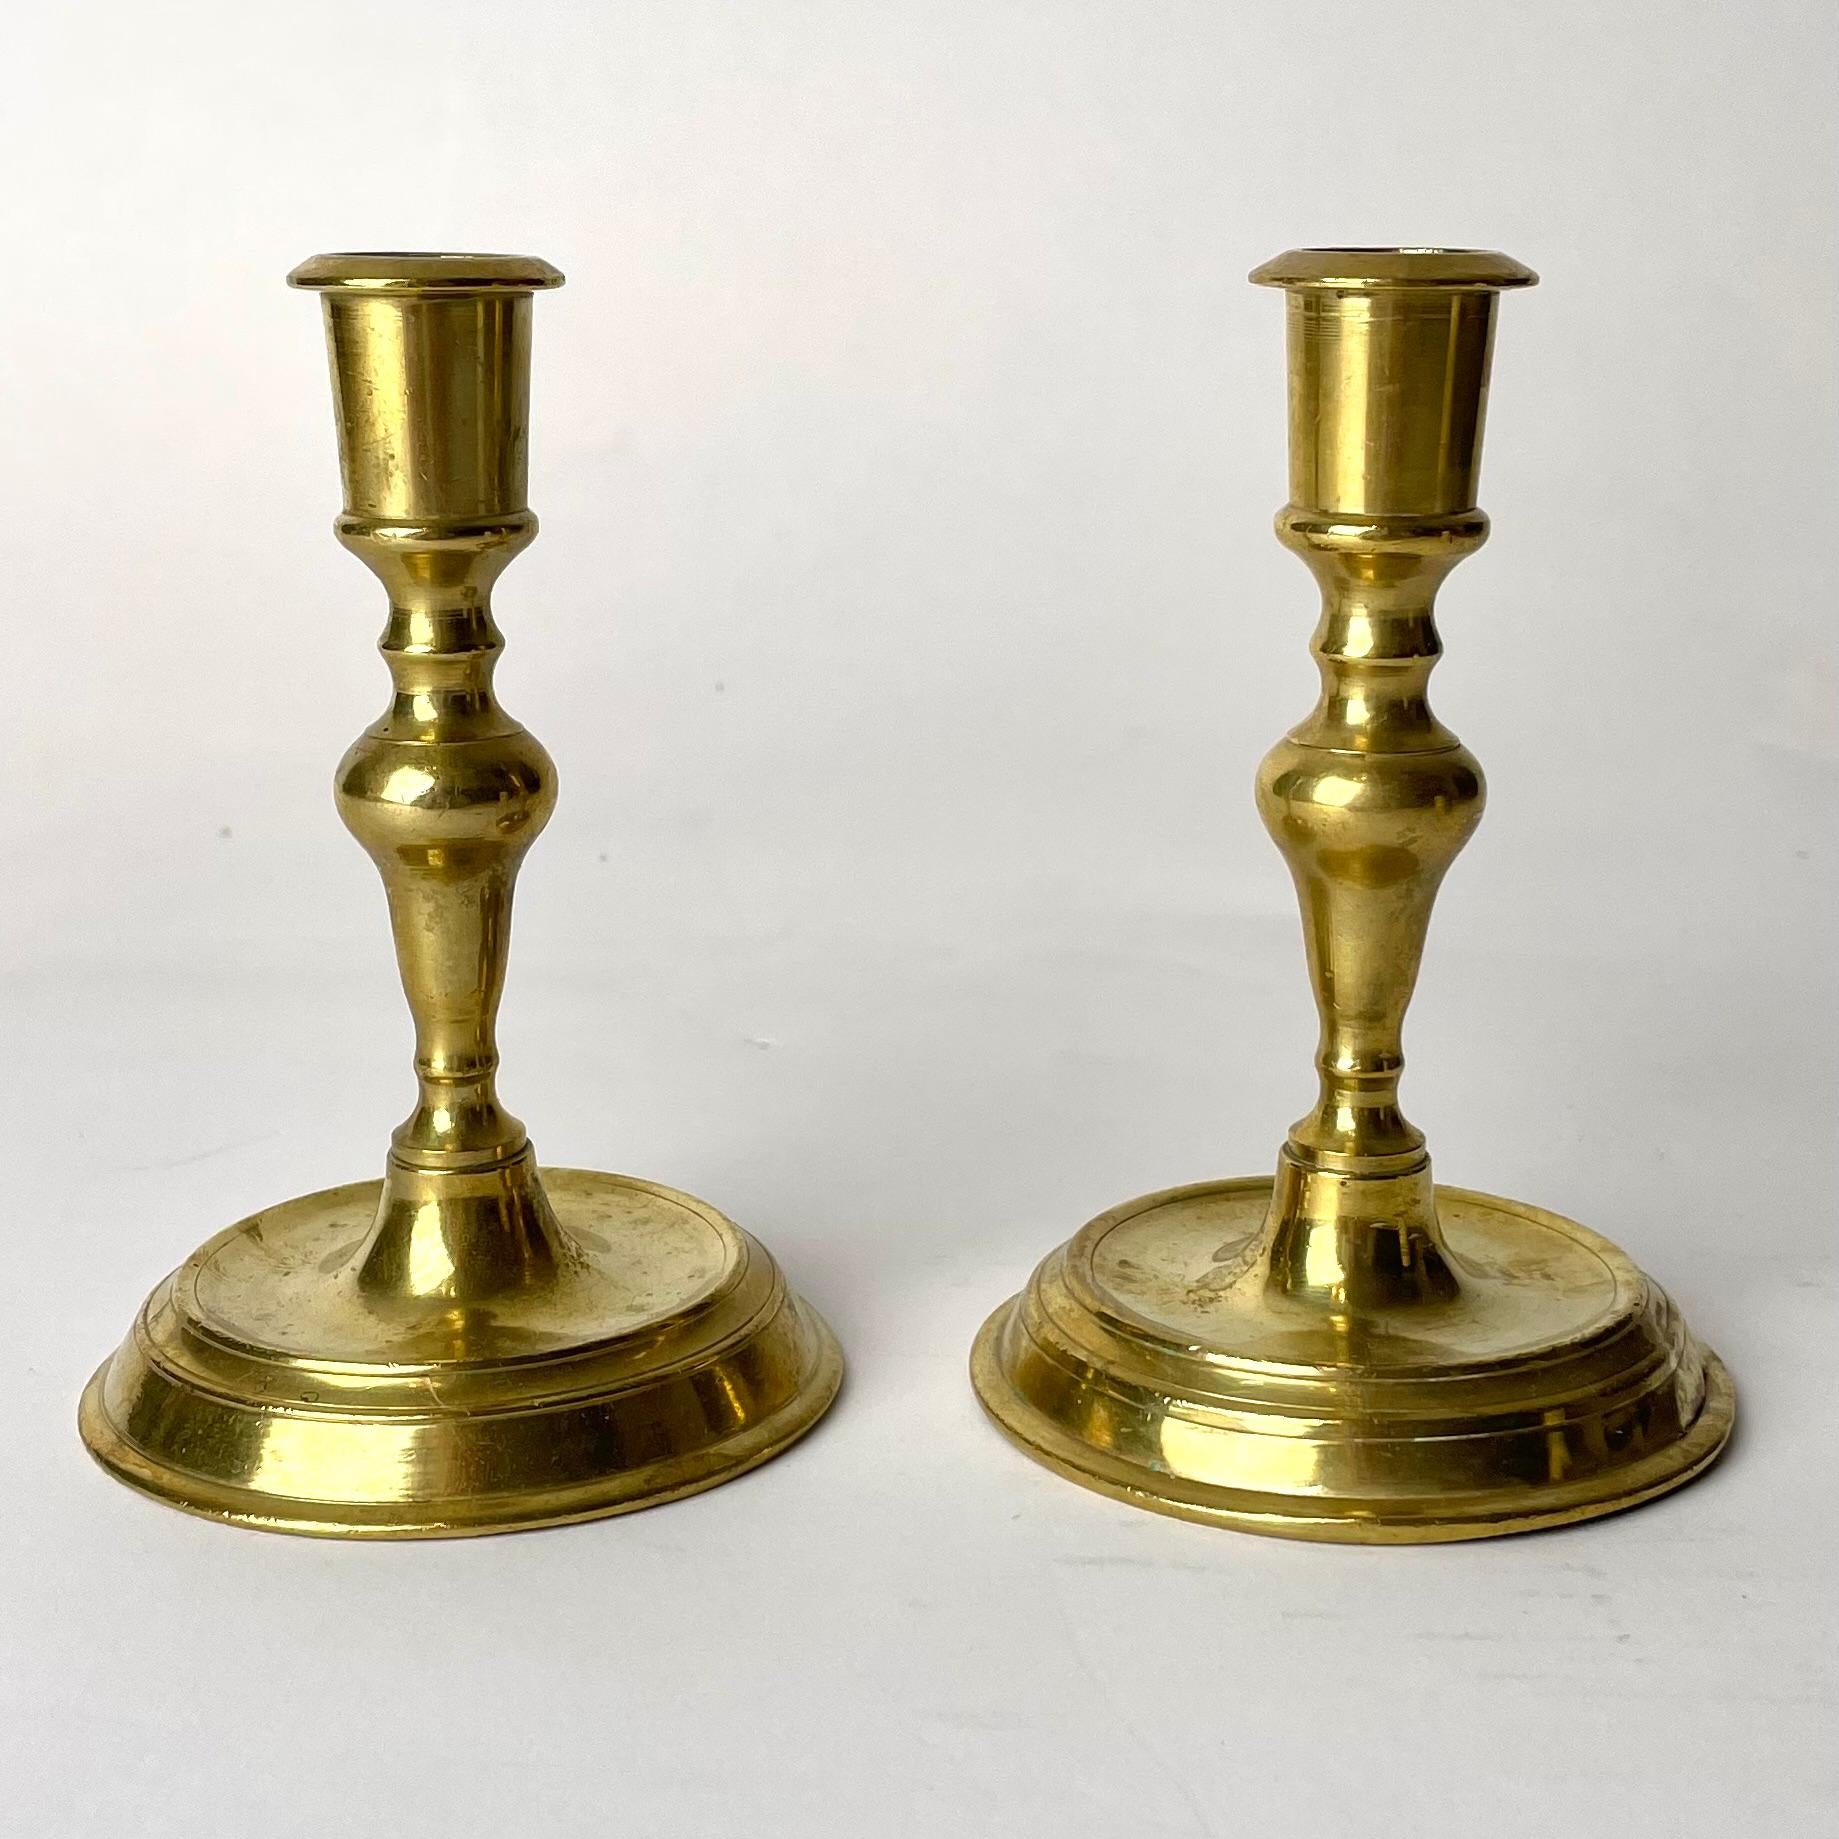 A Pair of Late Baroque Candlesticks, Brass. Made during the early 18th Century.

A beautiful pair of late baroque candlesticks, in a warm tone of brass. In the Late Baroque of the early 18th century, these candlesticks are of a refined and elegant